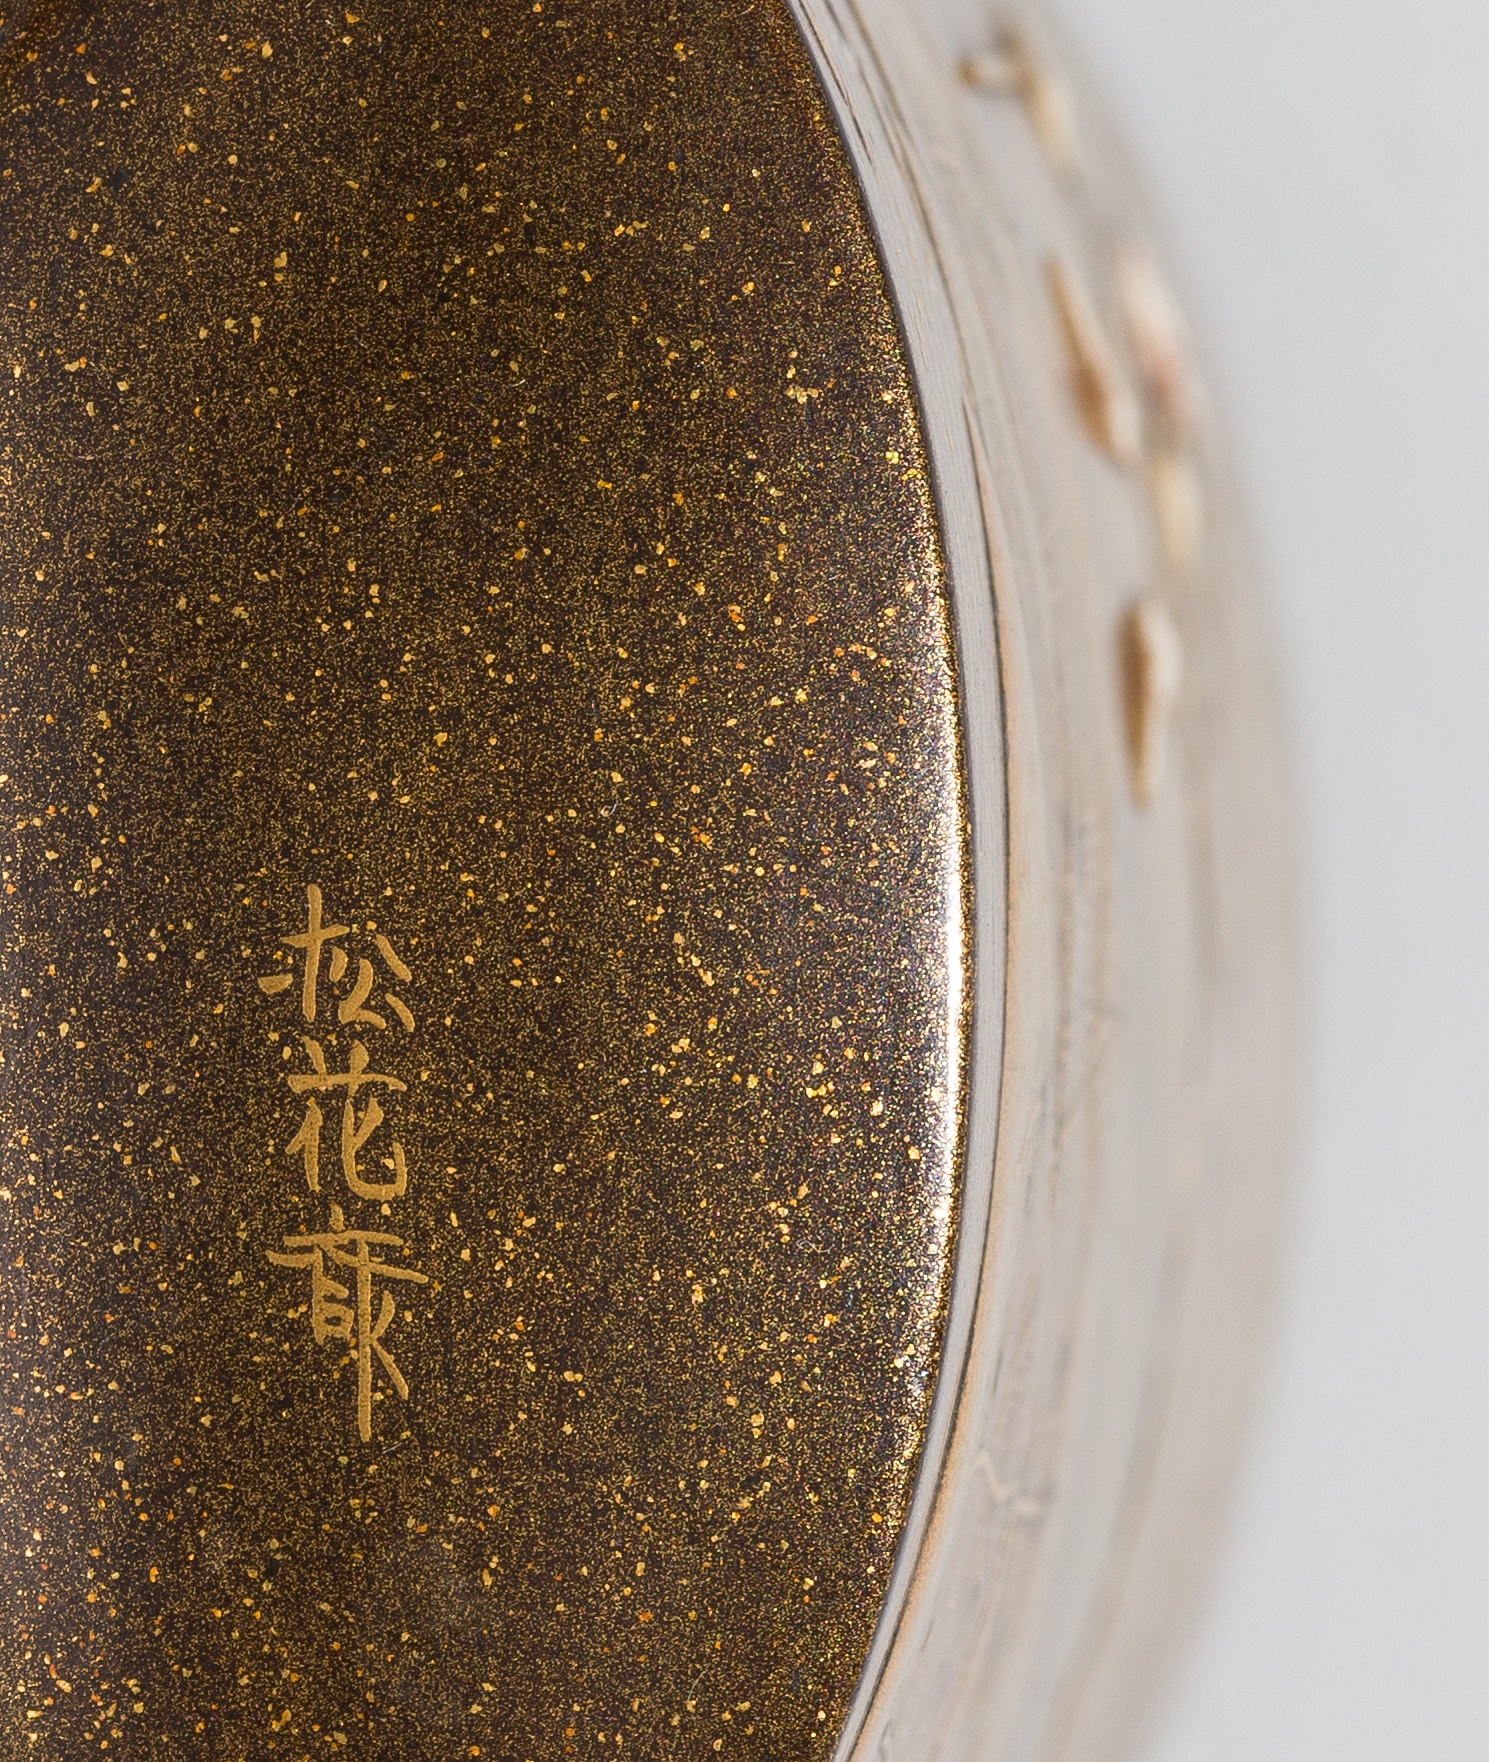 SHOKASAI: A FINE INLAID GOLD LACQUER FOUR-CASE INRO - Image 7 of 7